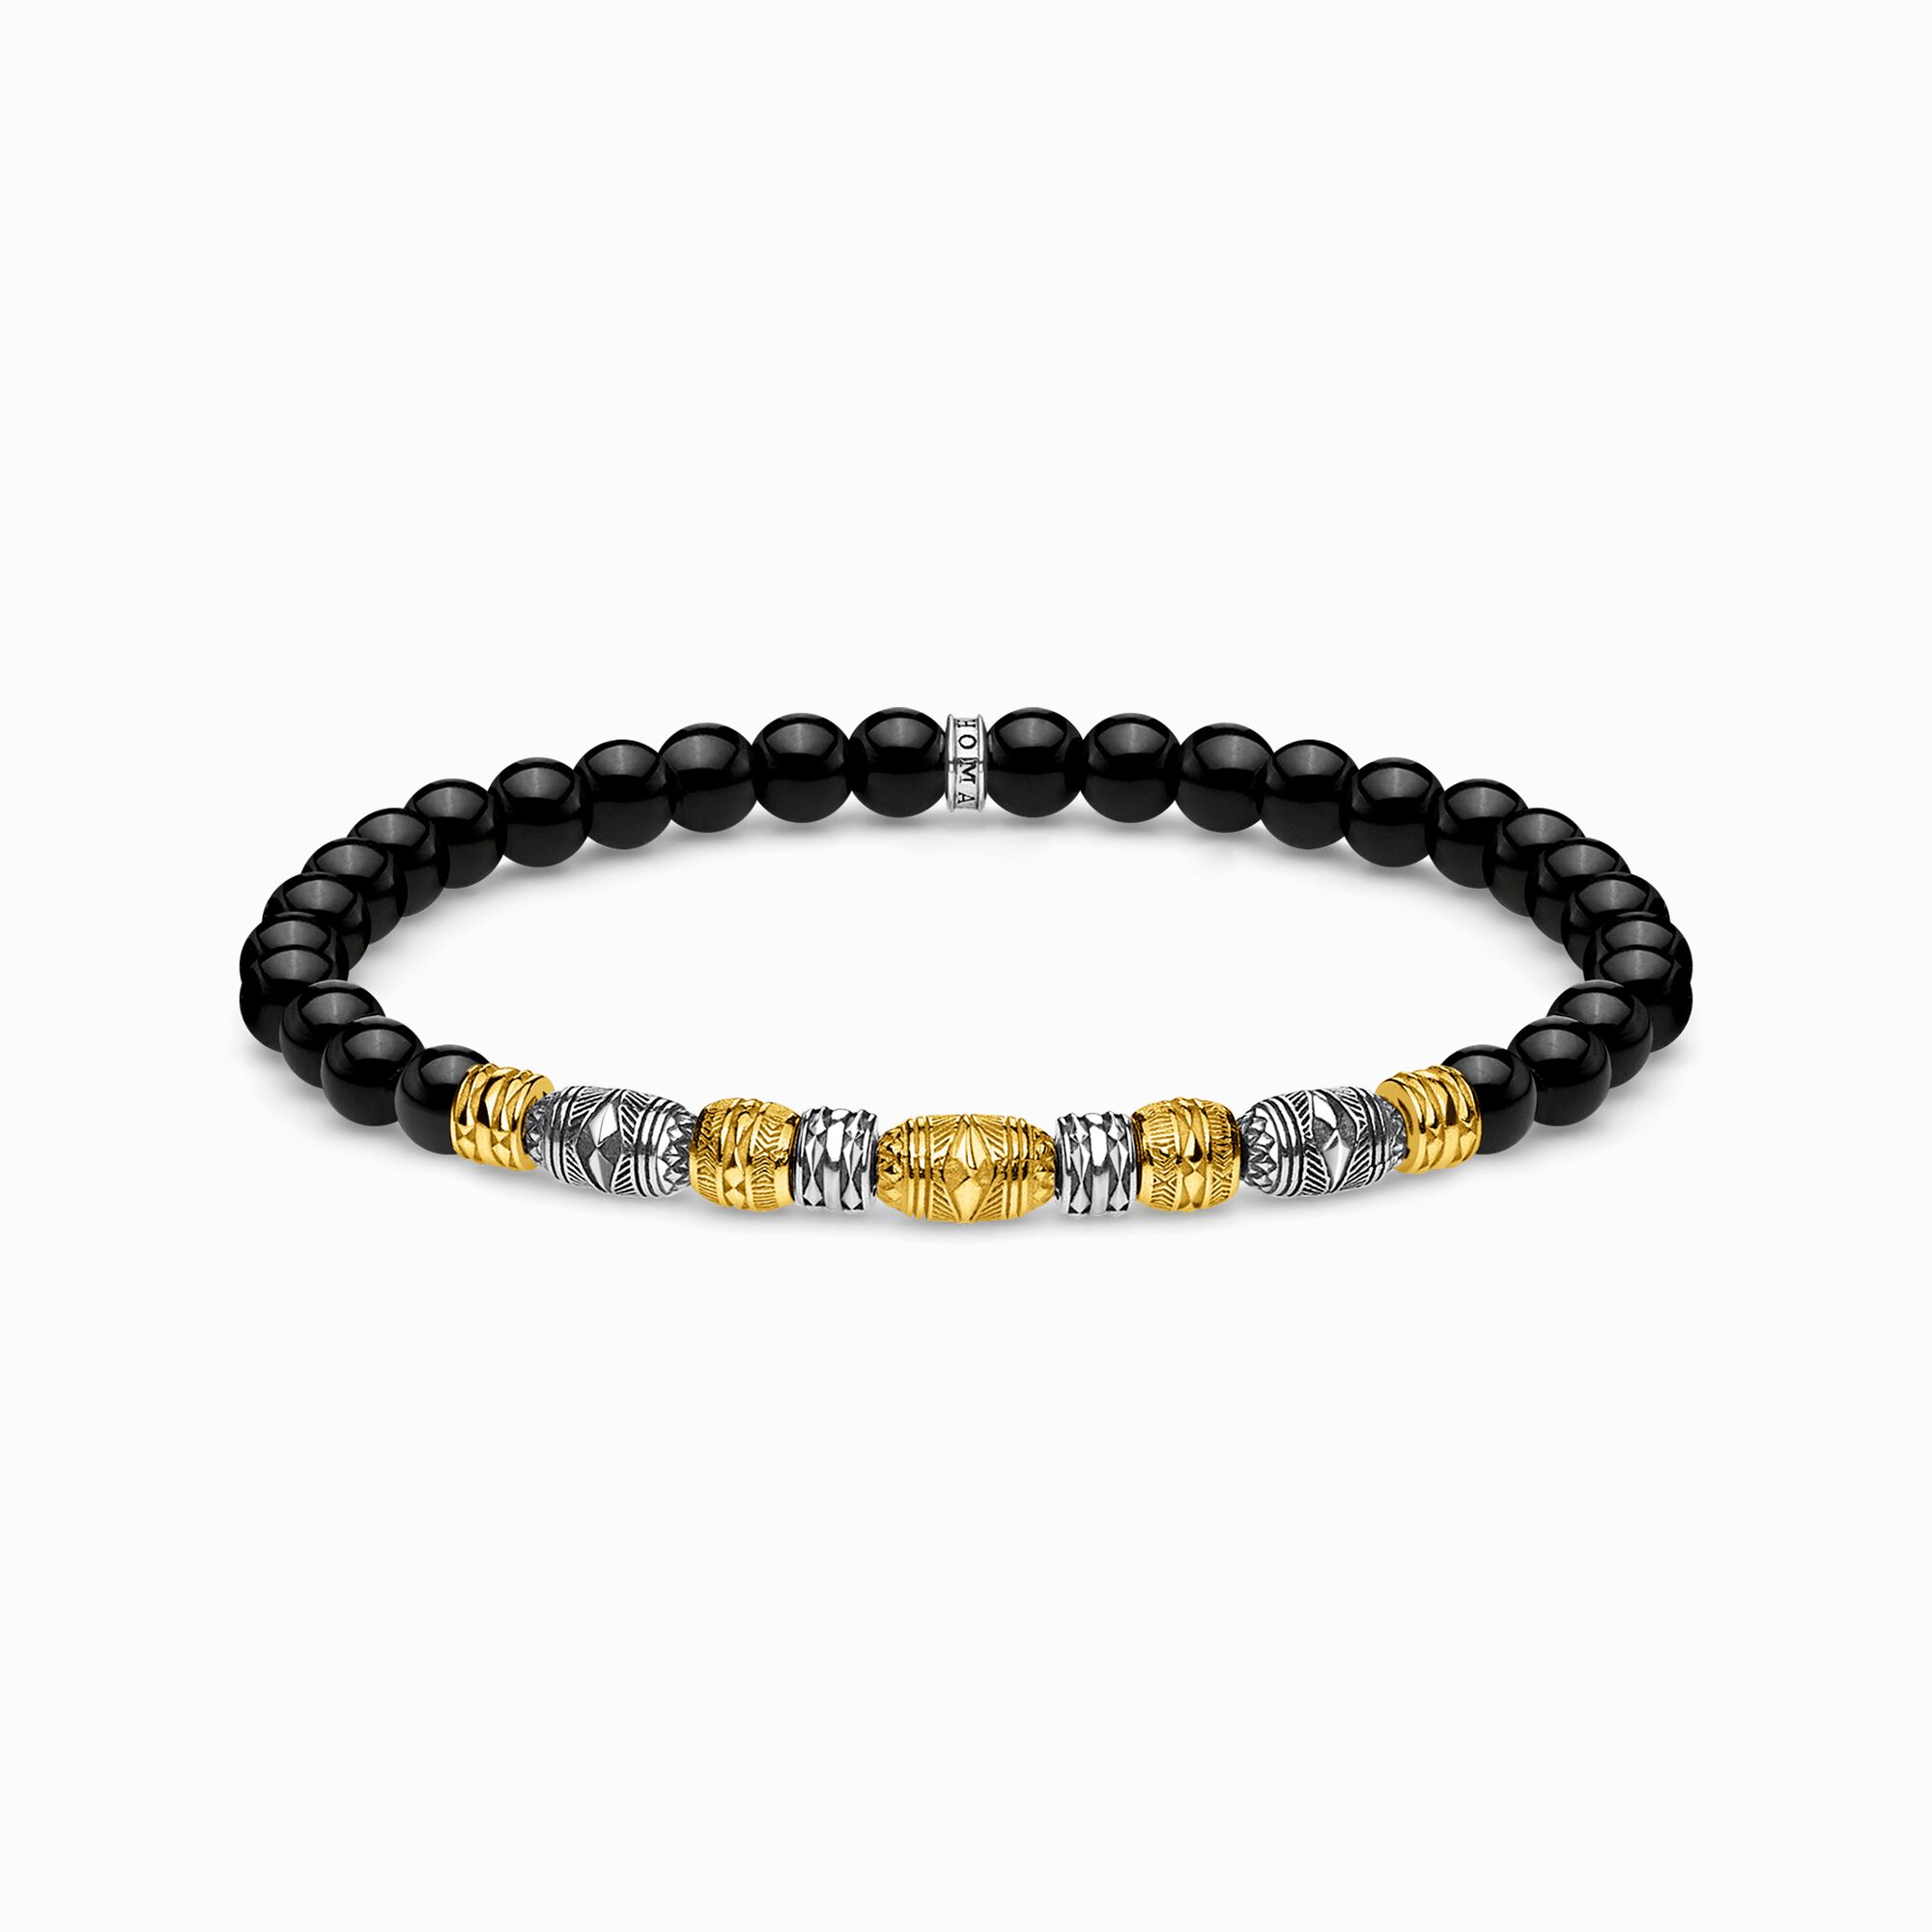 Bracelet two-tone lucky Charm, black from the Glam &amp; Soul collection in the THOMAS SABO online store